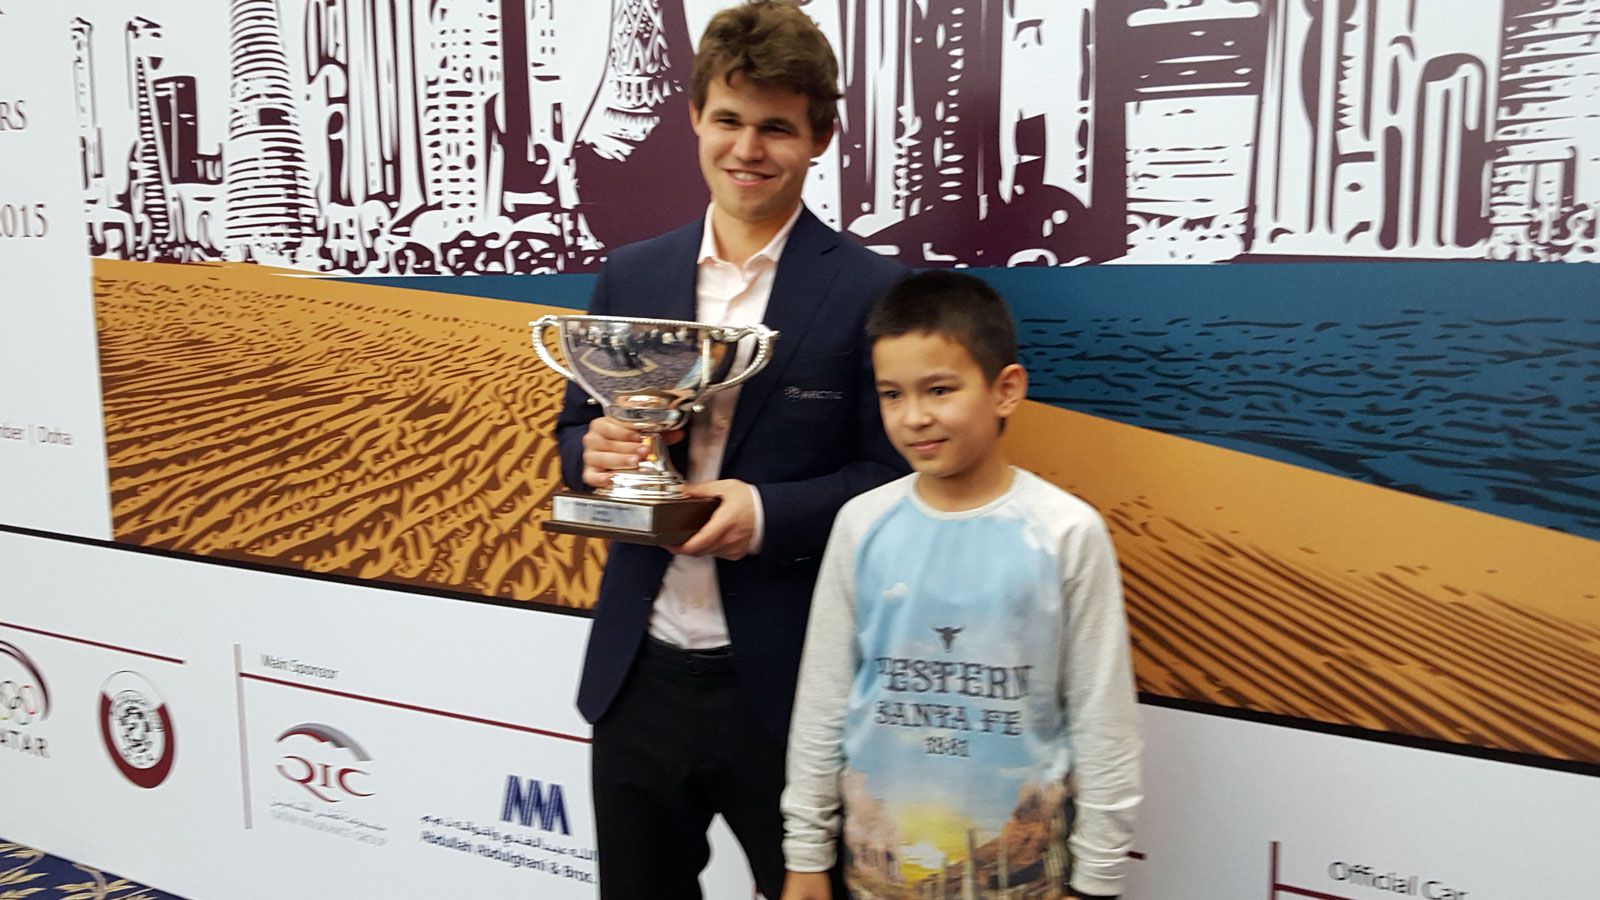 During the prize ceremony at the 2015 Qatar Masters, Abdusattorov got the chance to pose with Carlsen. Photo: Tarjei J. Svensen